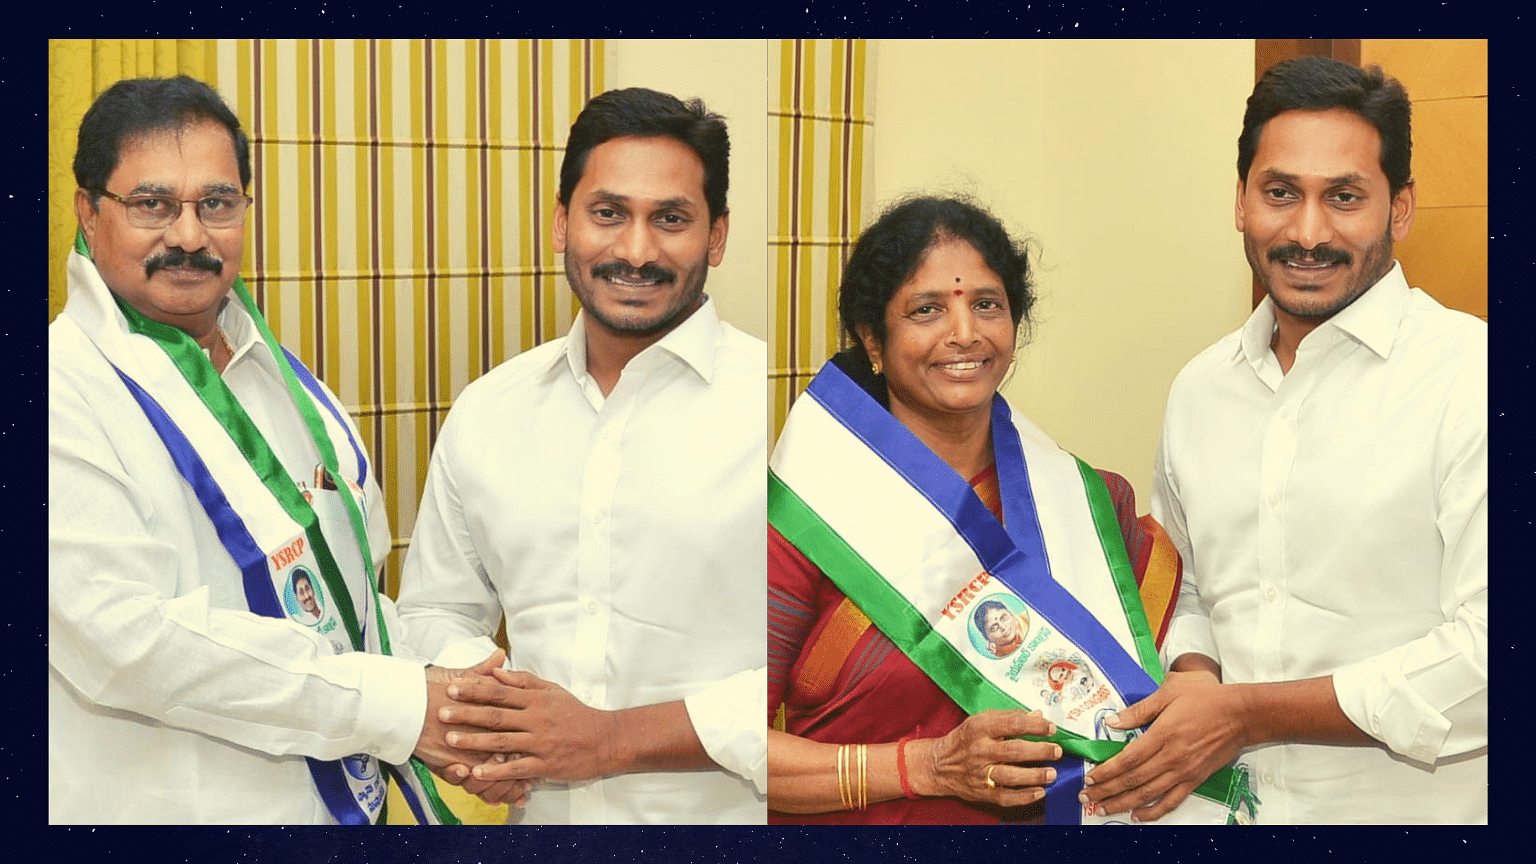 TDP leader Adala Prabhakar Reddy and former MP Vanga Geetha joined Jaganmohan Reddy’s YSRC on 16 March, and were announced as Lok Sabha candidates for the party on 17 March.